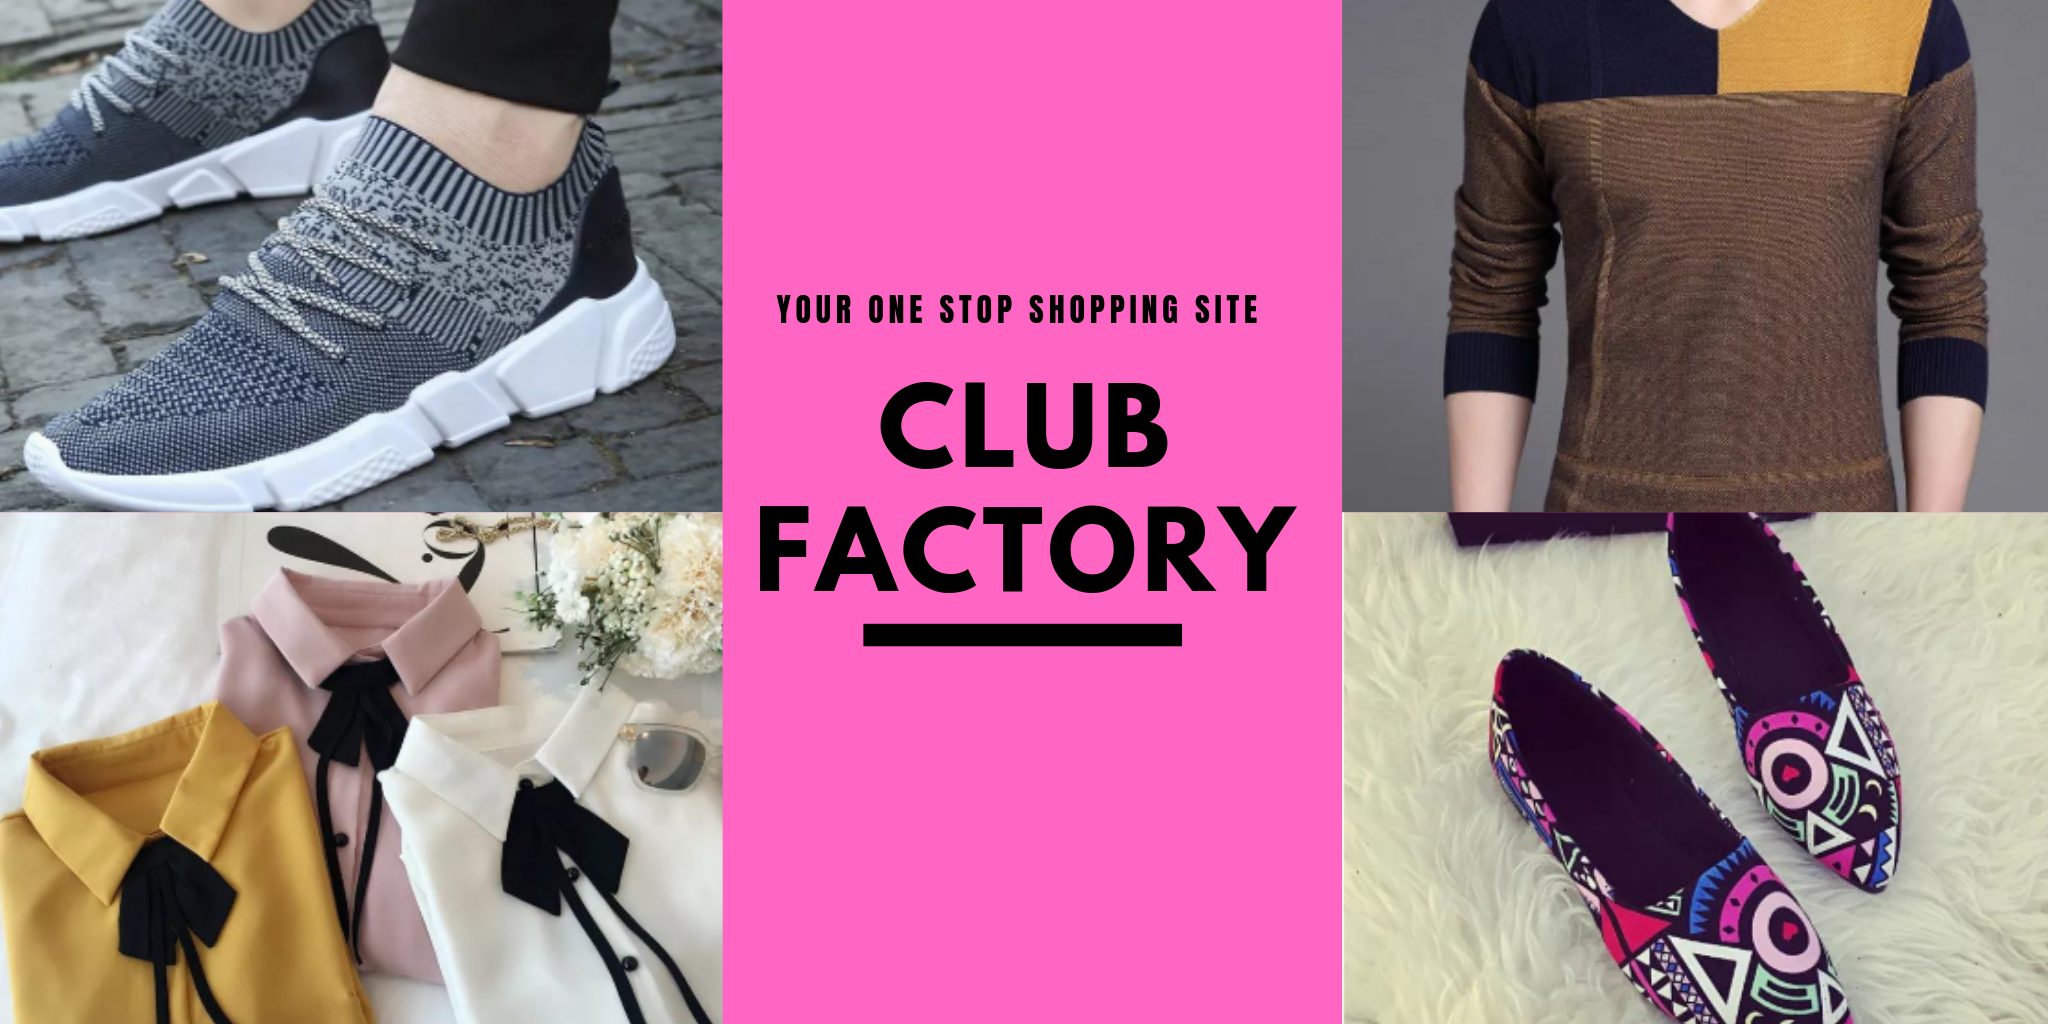 Create an eCommerce Online Shopping App like Club Factory